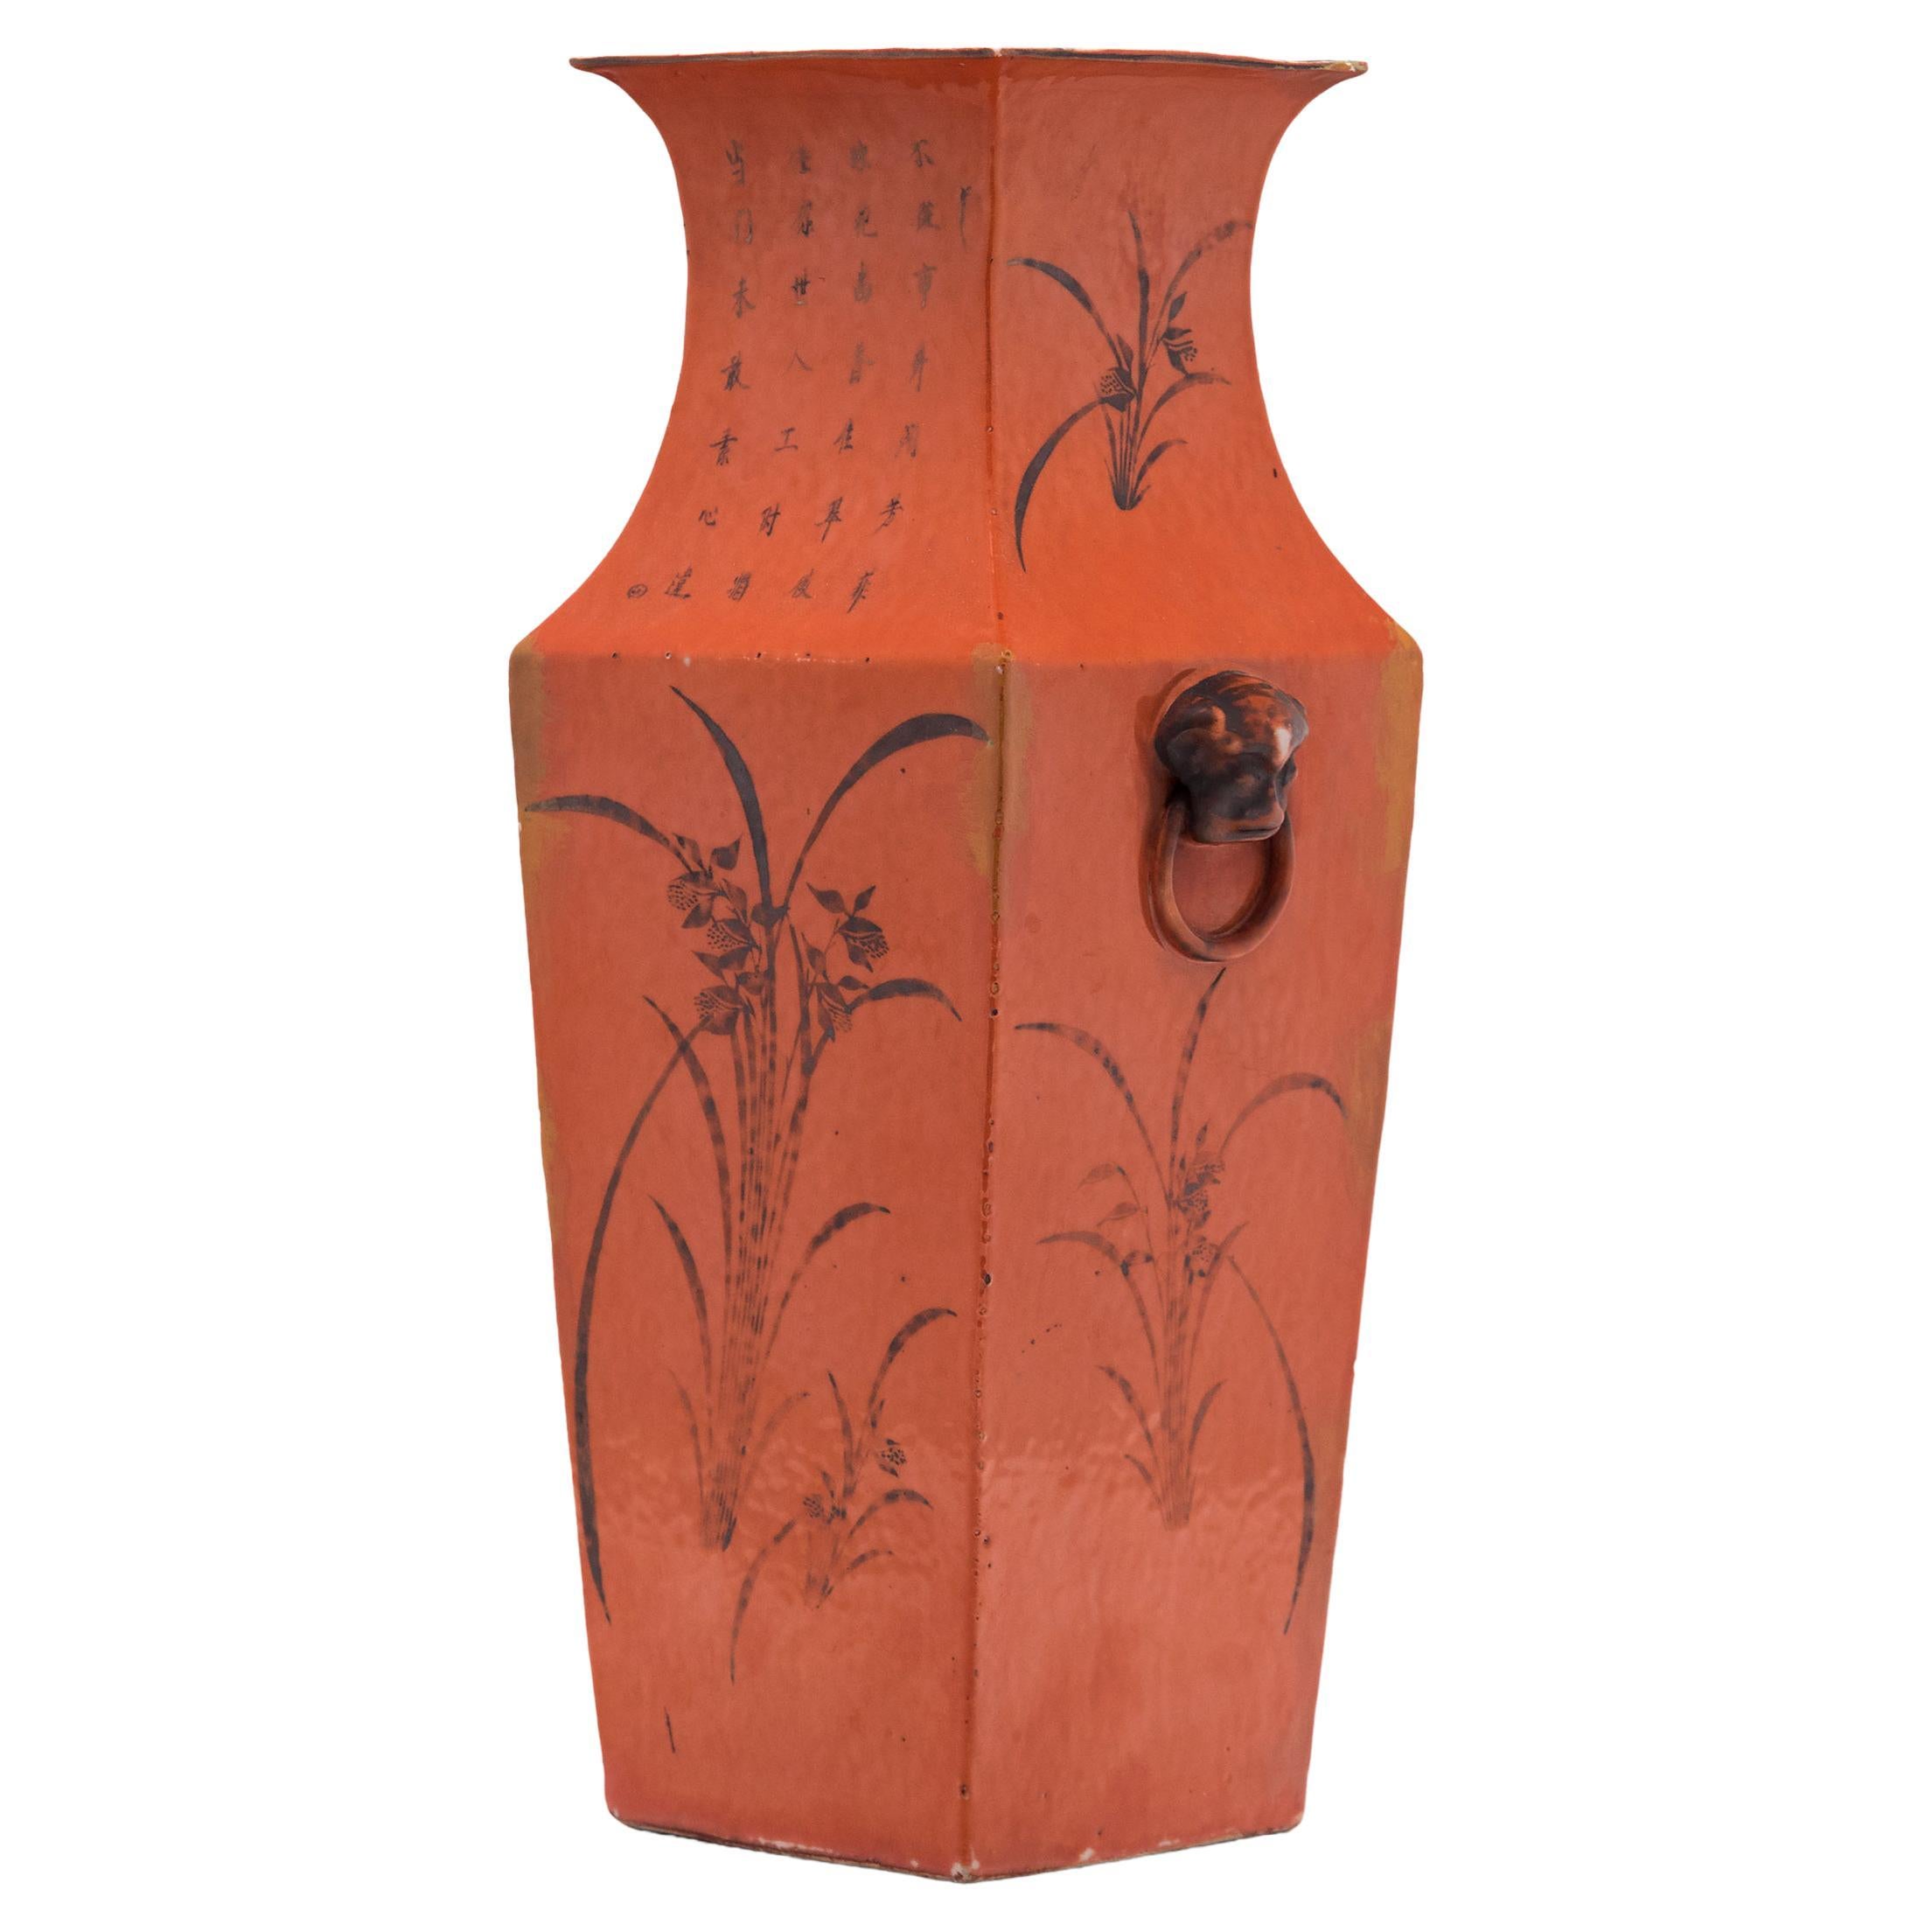 Chinese Persimmon Squared Fantail Vase, c. 1920 For Sale